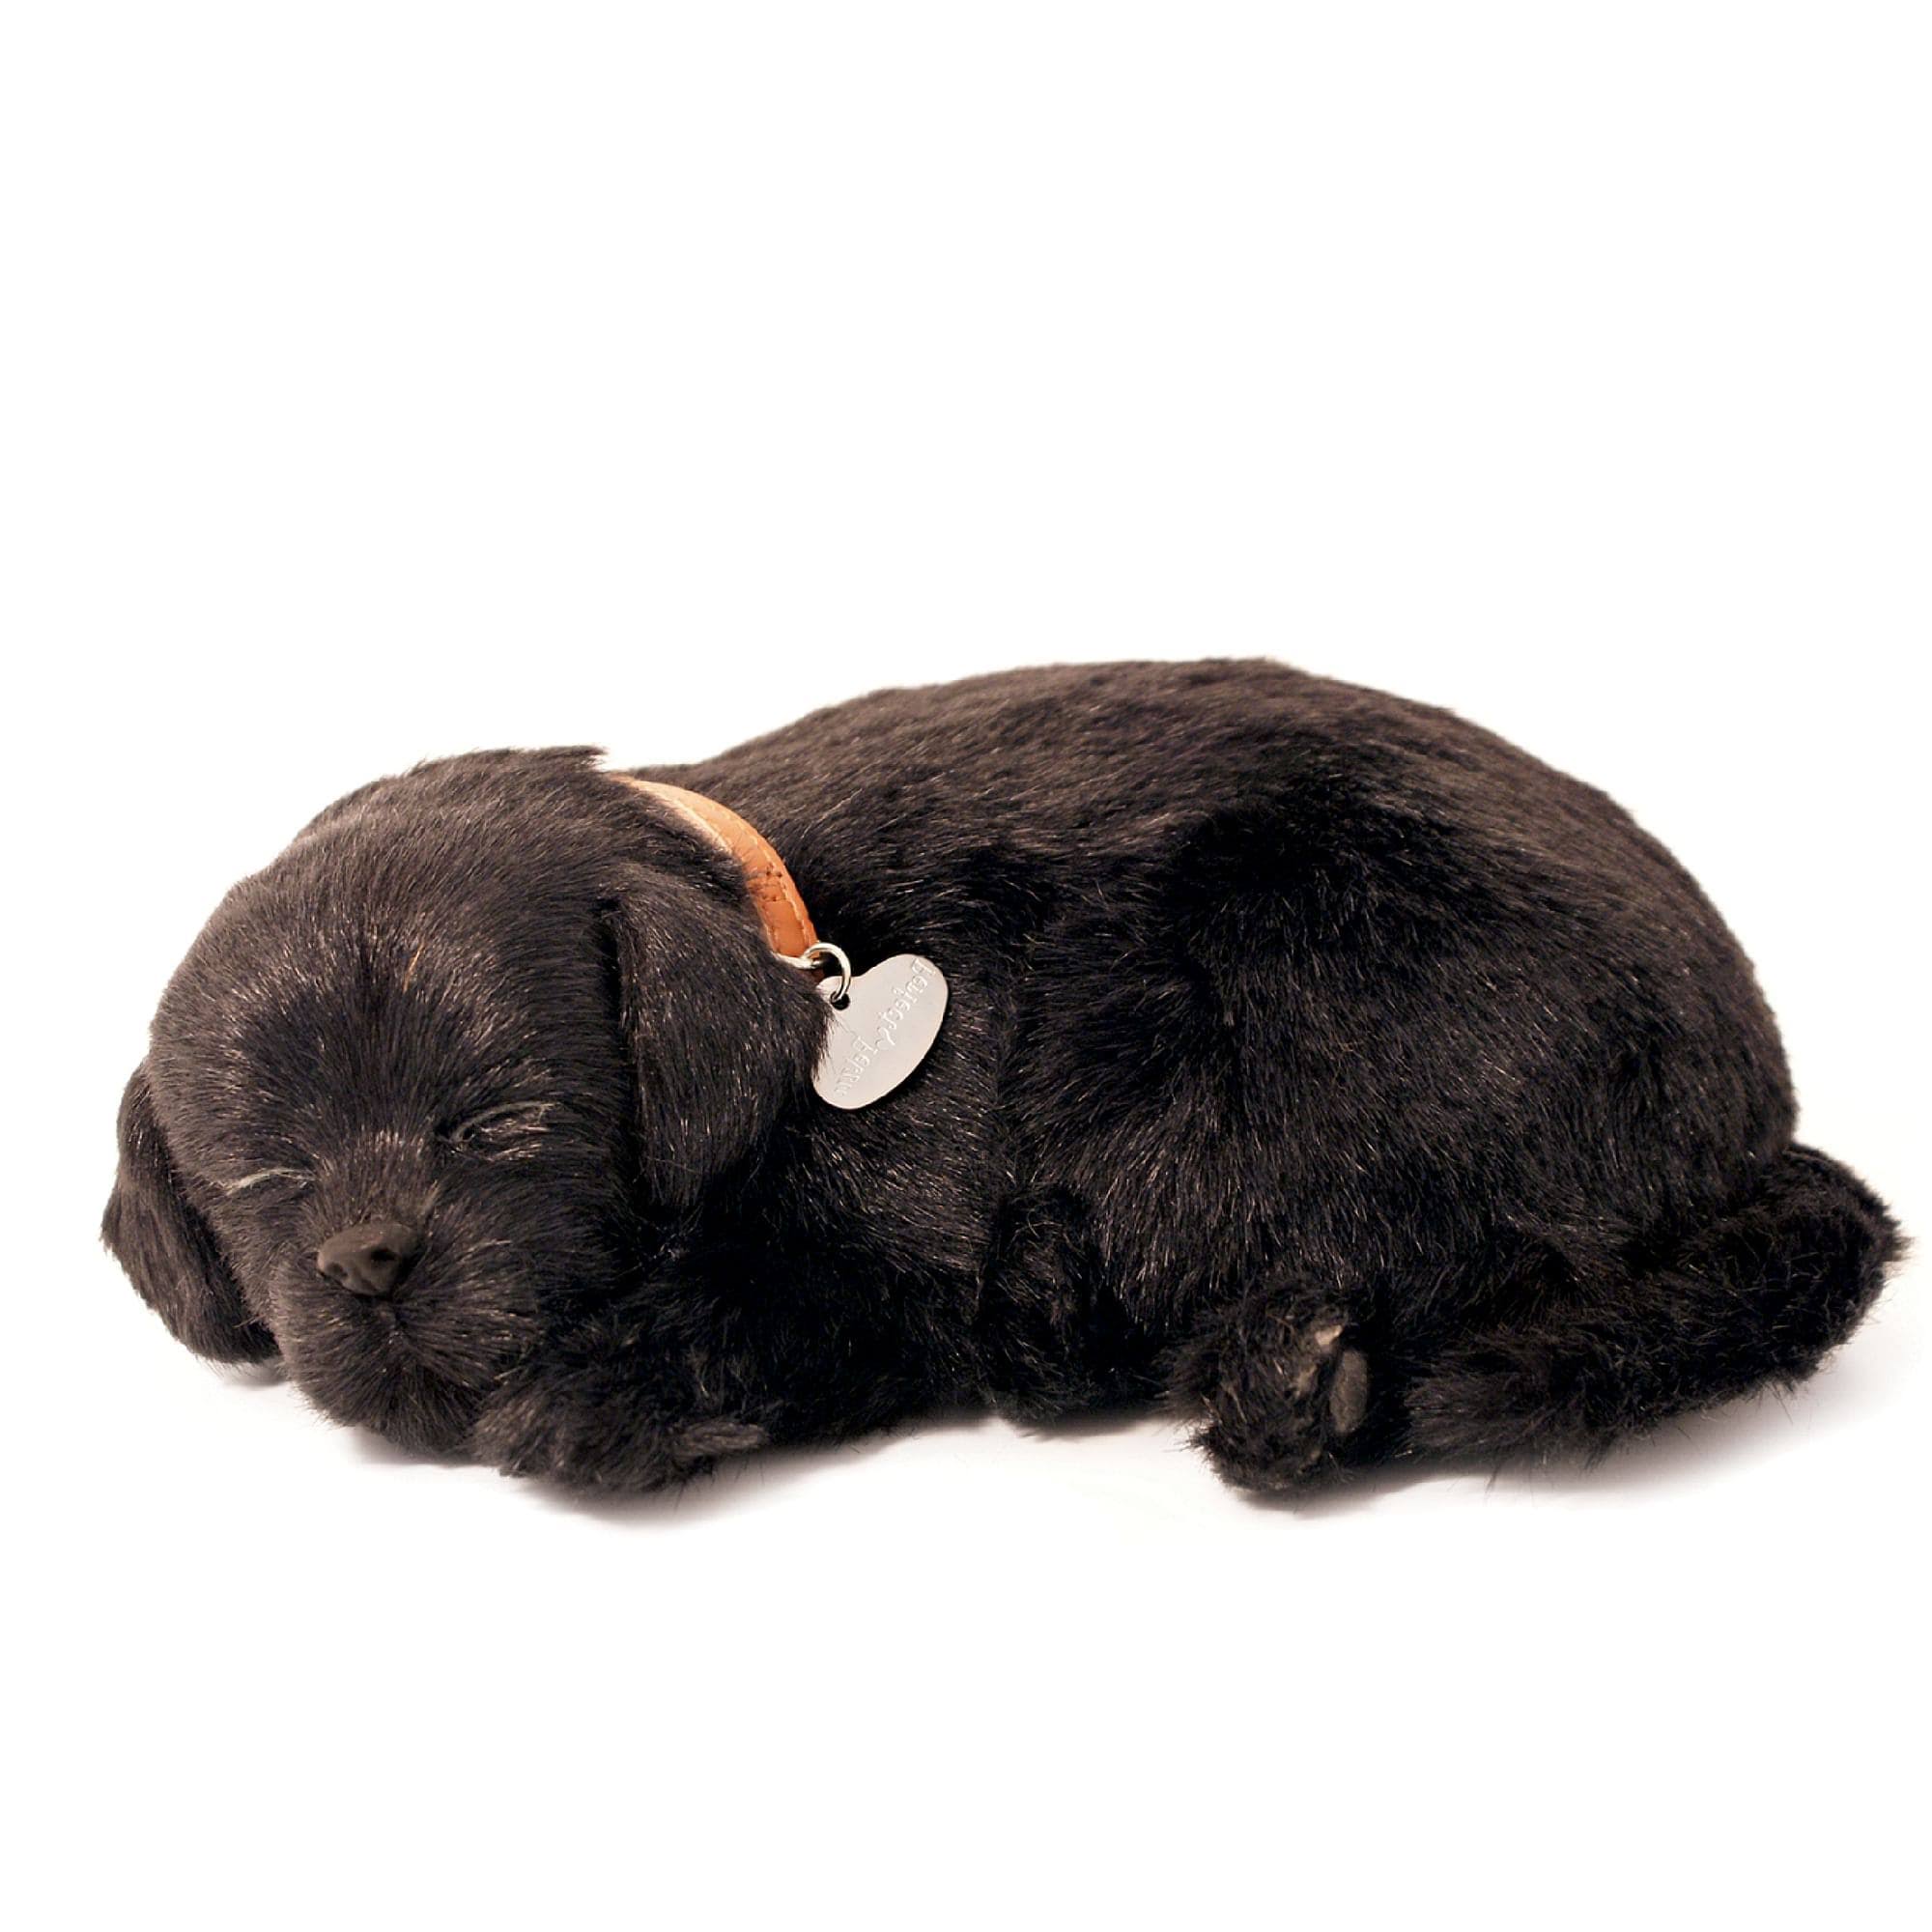 Petzzz Black Lab Breathing Puppy in Dog Bed